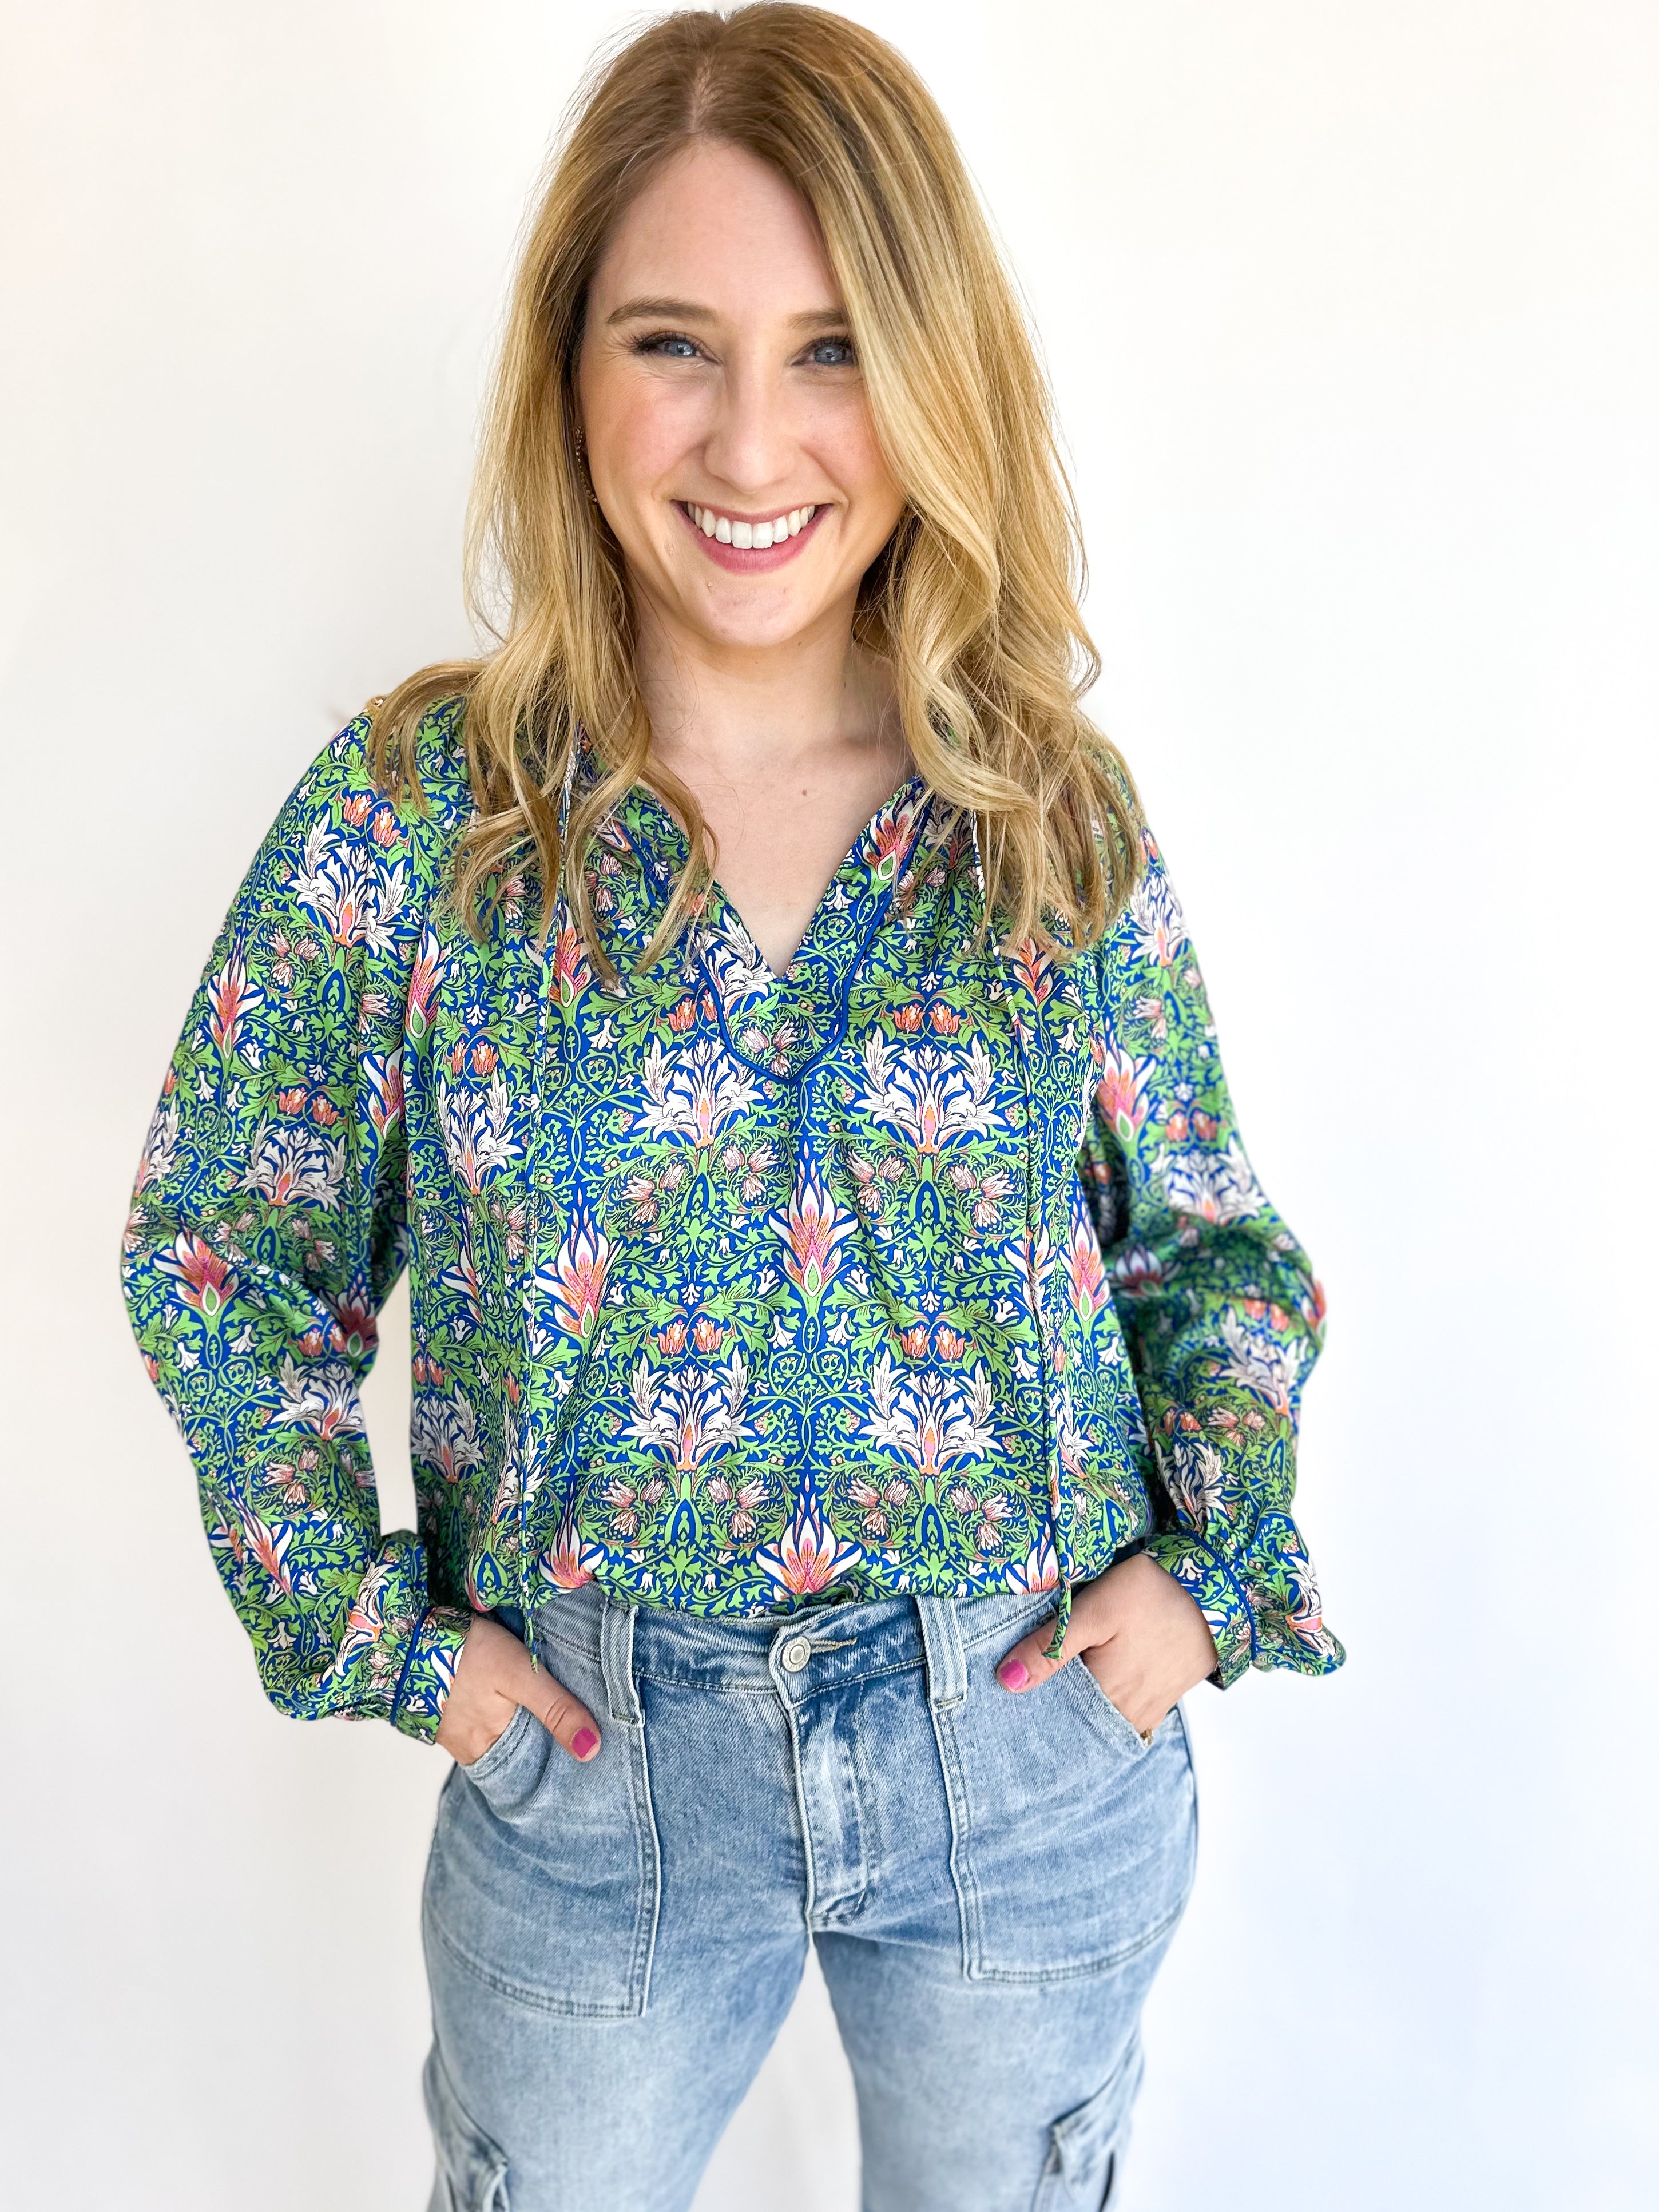 Blue Green Floral Blouse-200 Fashion Blouses-CURRENT AIR CLOTHING-July & June Women's Fashion Boutique Located in San Antonio, Texas